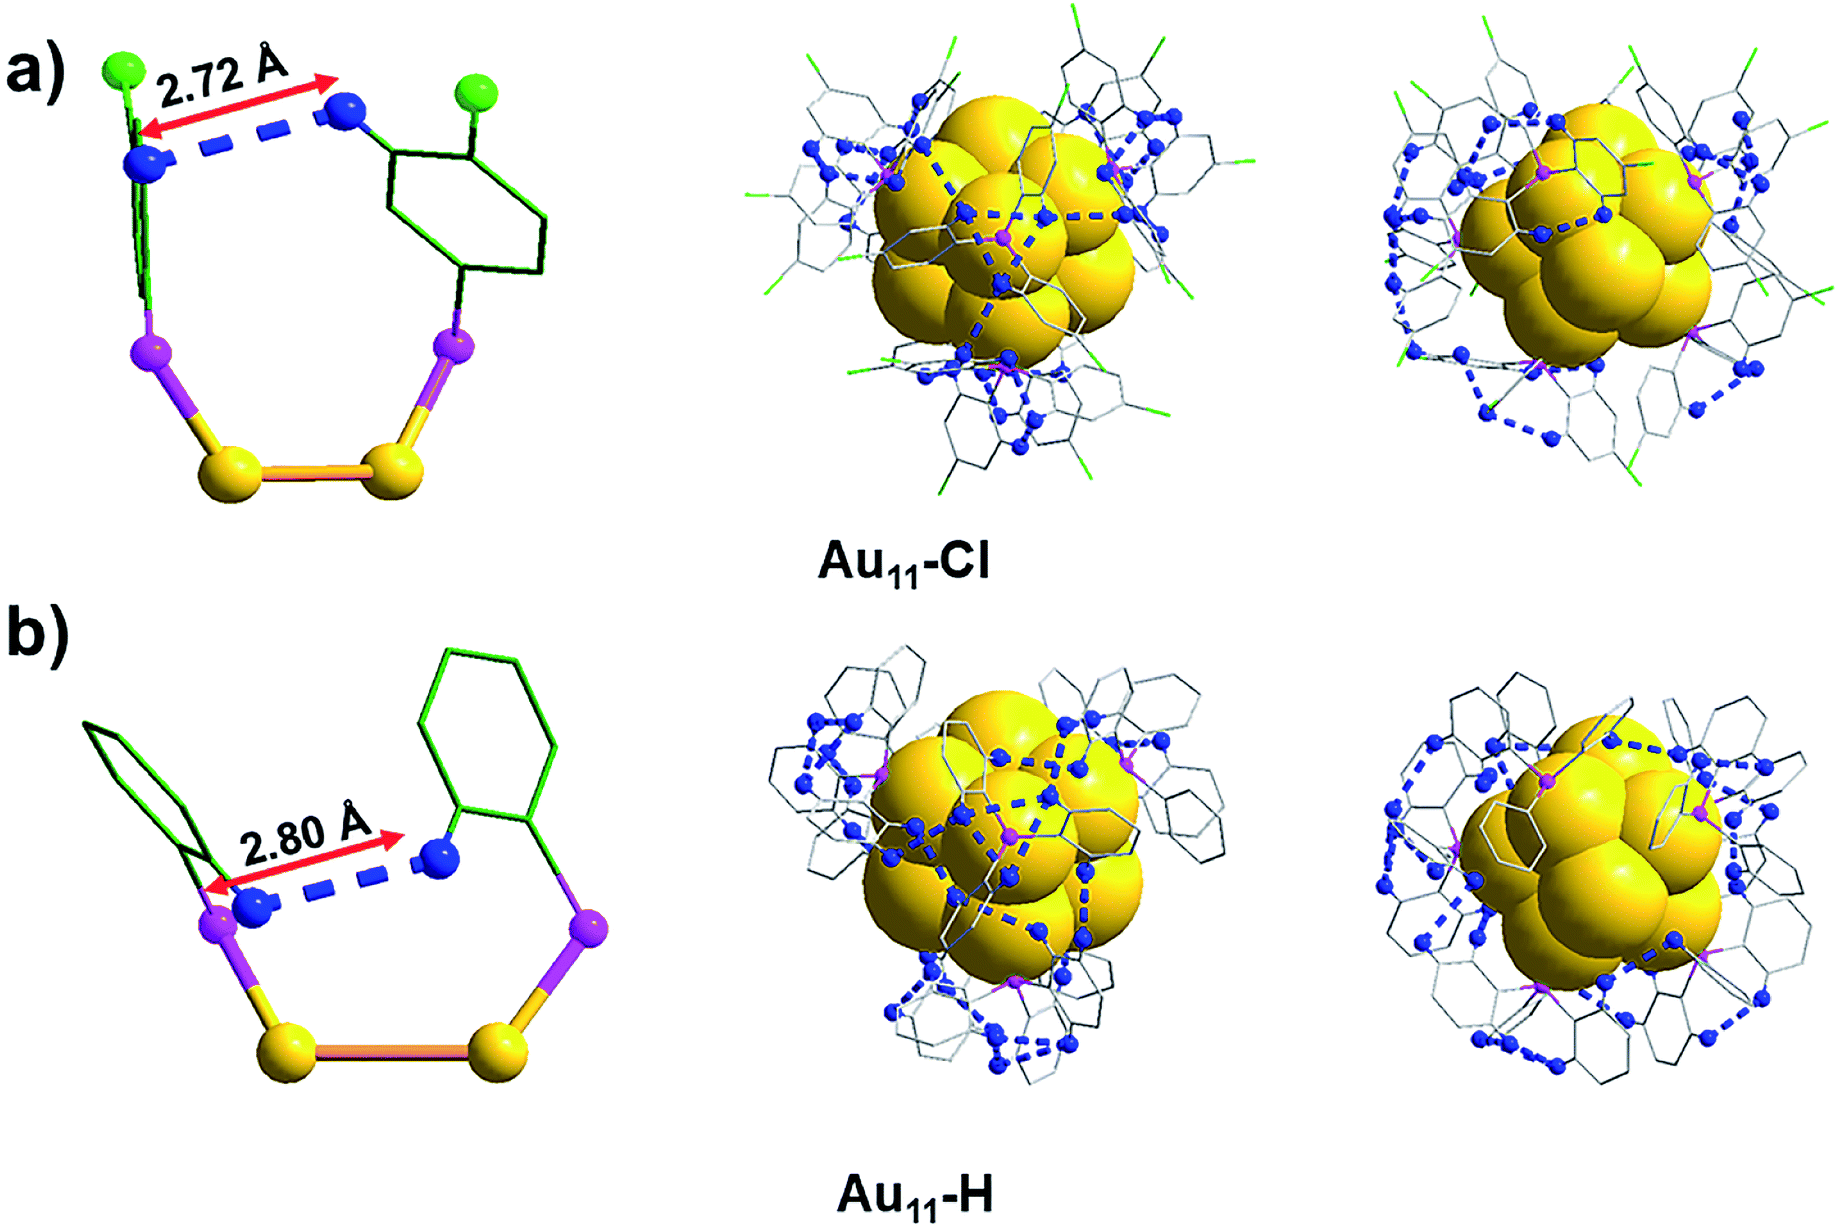 Polymorphism Of Au11 Pr3 7cl3 Clusters Understanding C H P Interaction And C H Cl C Van Der Waals Interaction On Cluster Assembly By Surface Modification Rsc Advances Rsc Publishing